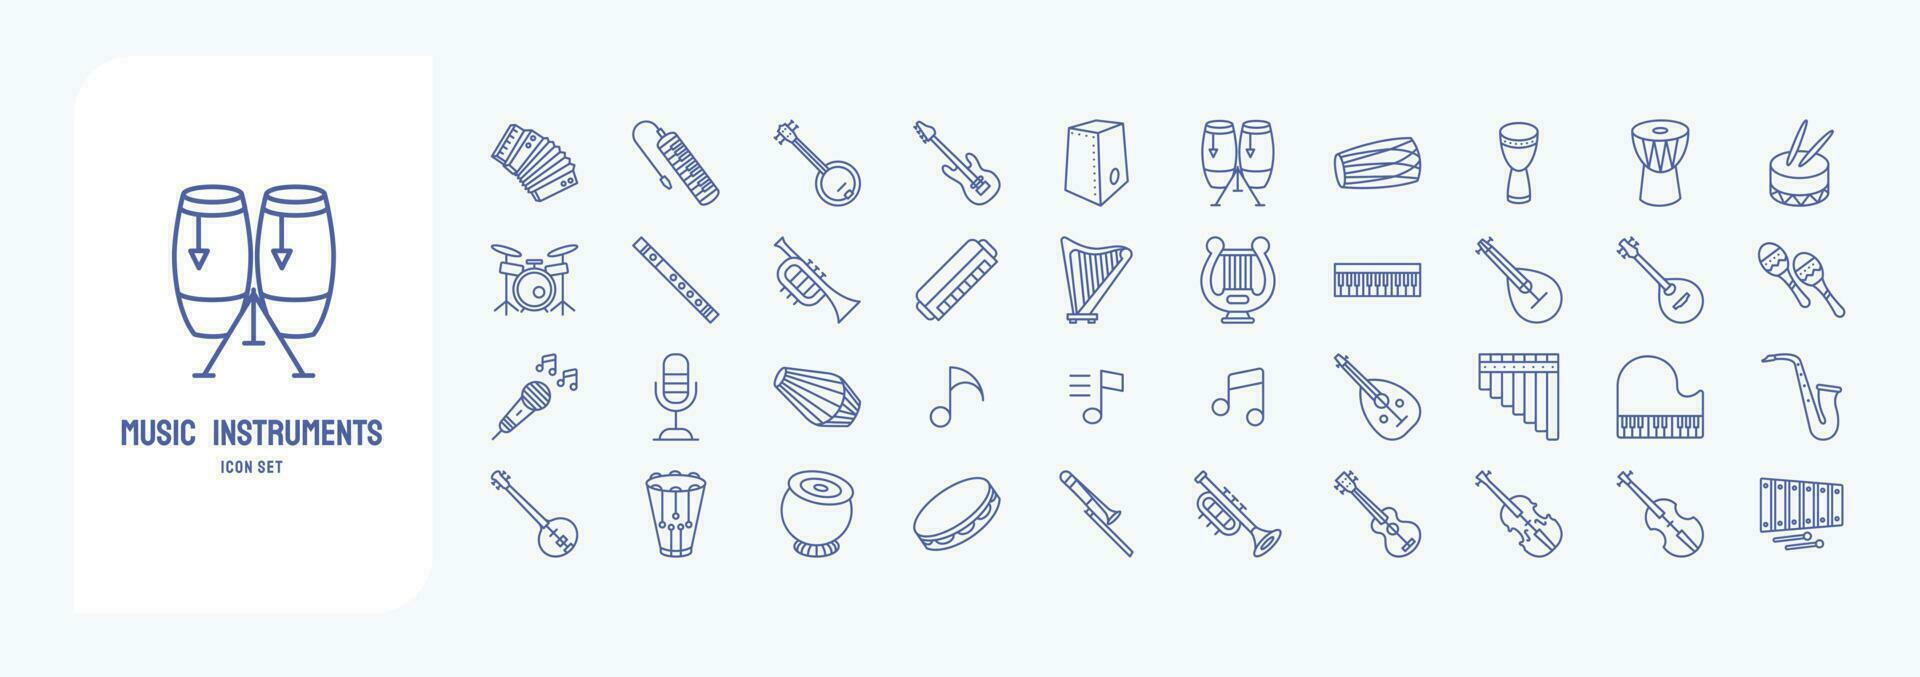 Music Instruments, including icons like Accordion, Banjo, Bass Guitar, Conga and more vector